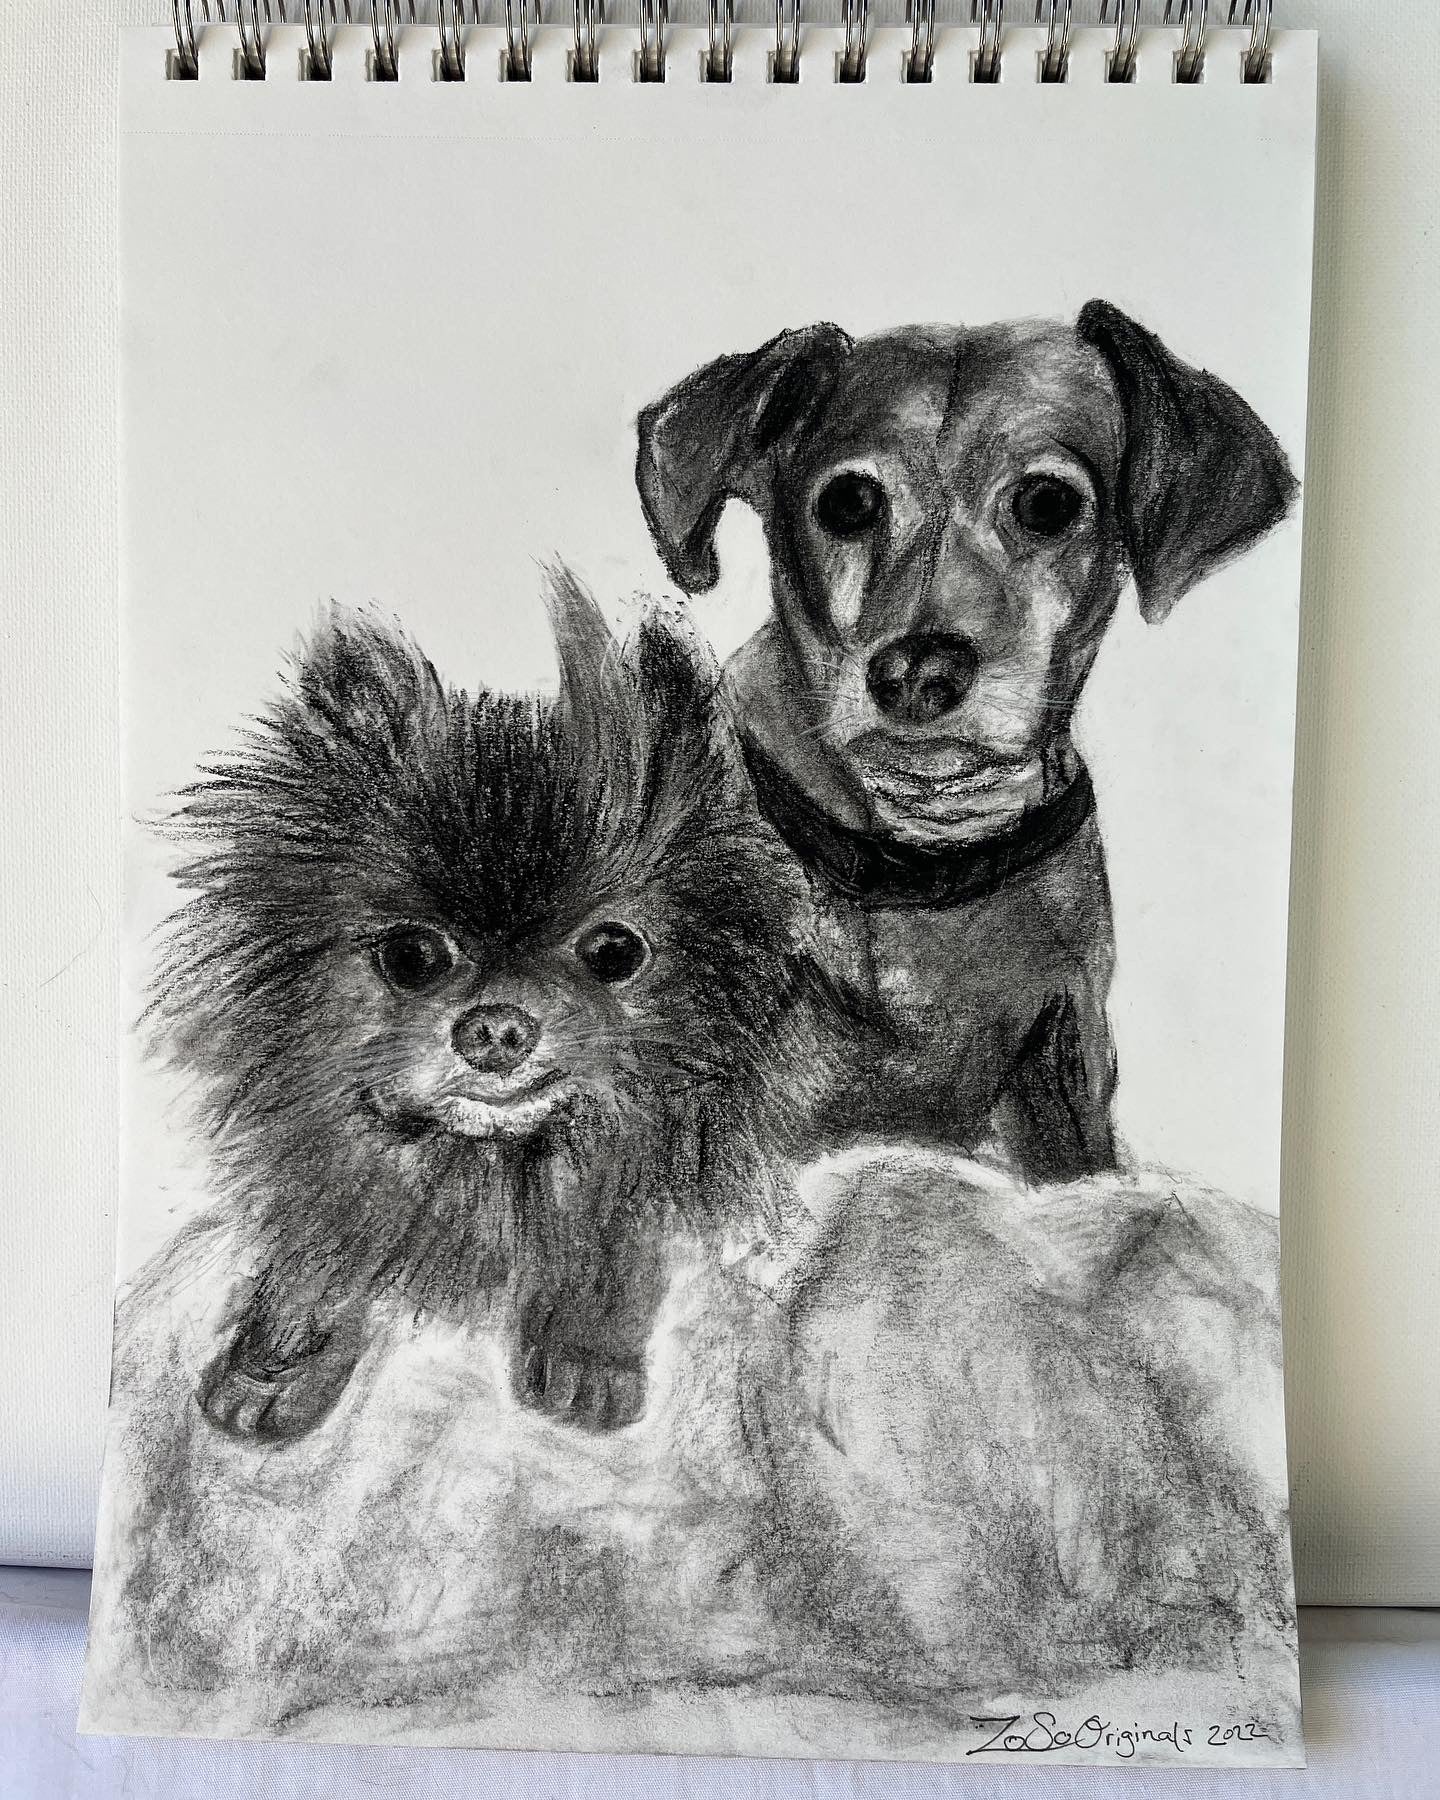 2 dogs posing in charcoal drawling